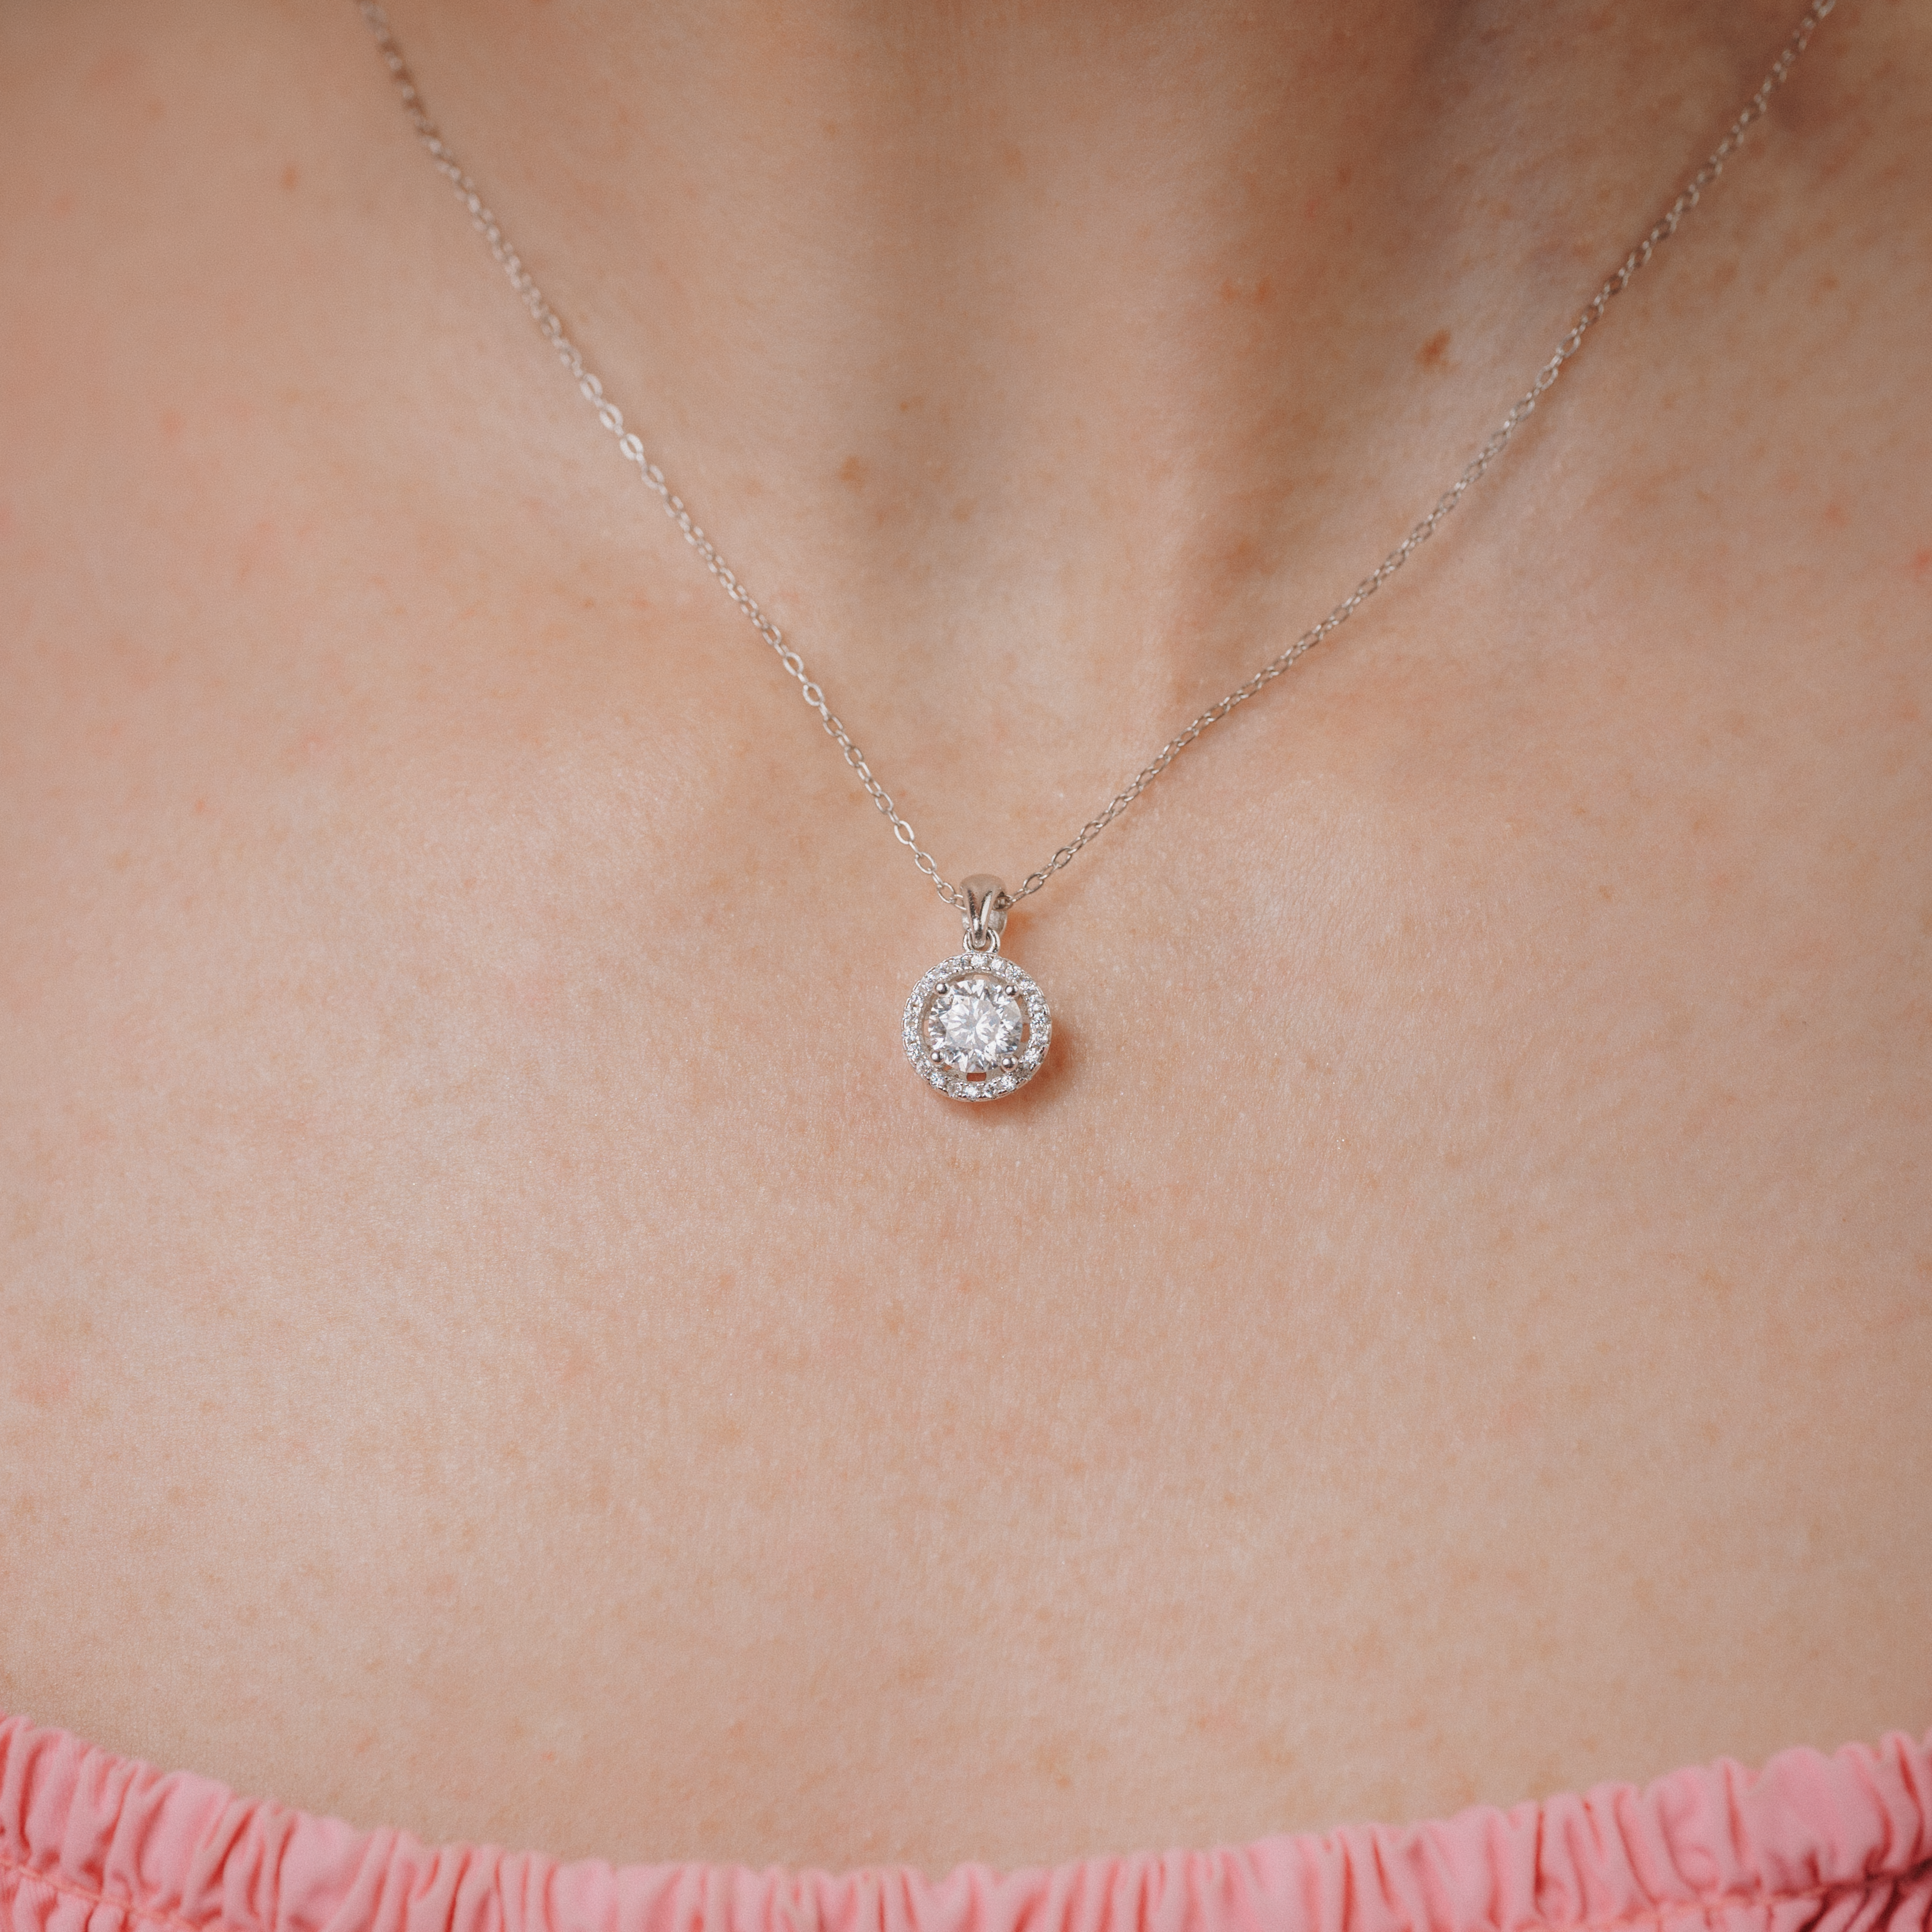 【#21】925 Sterling Silver Moissanite Necklace